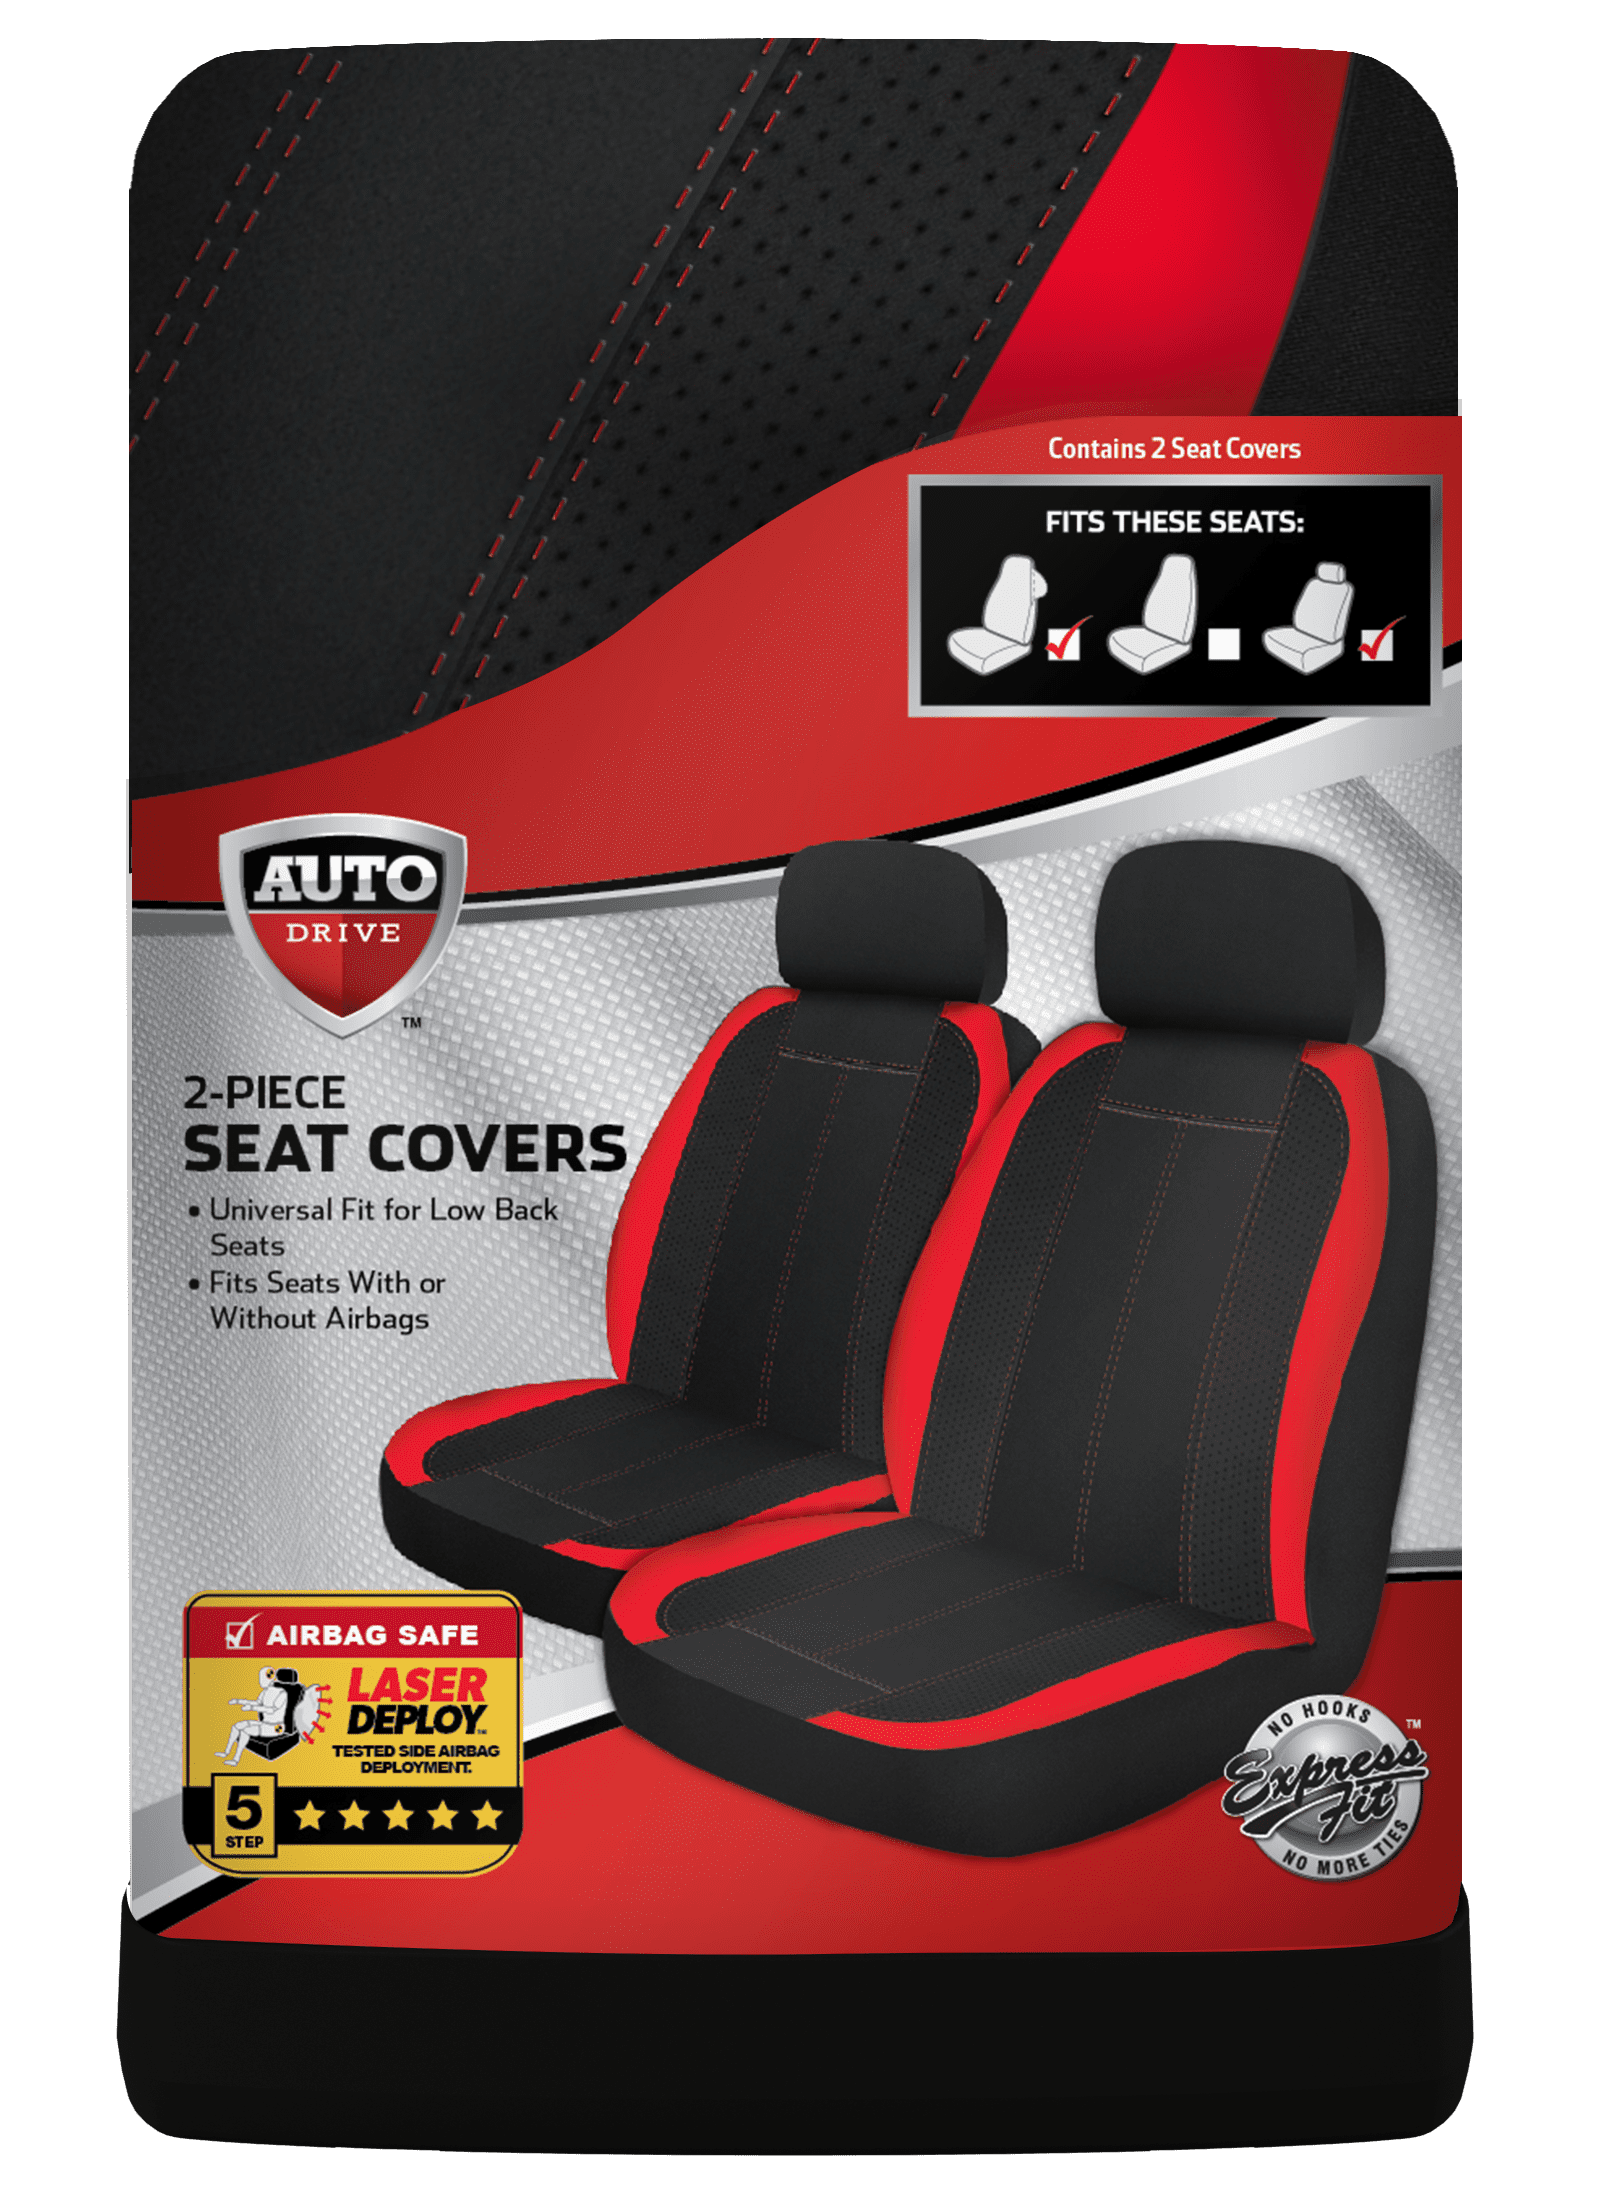 Two-Tone Car Seat Covers w 2 Separate Headrest Covers: Black & White Front Semi-Custom Fit Will Make Fit Any Car/Truck/Van/SUV 21 Colors 